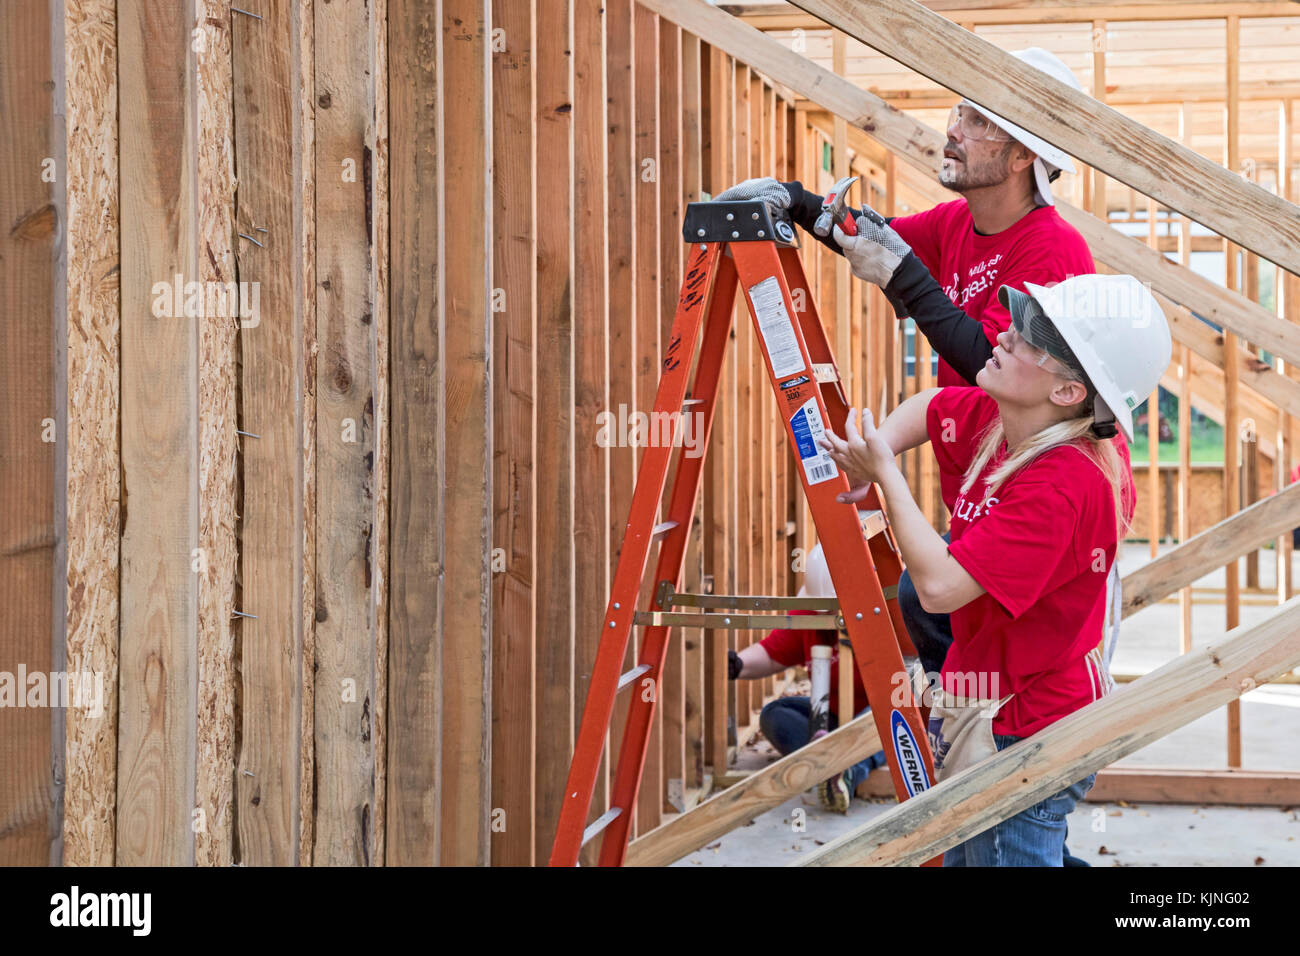 Houston, Texas - Volunteers from Wells Fargo Bank help build a Habitat for Humanity house for a low-income family. The need for affordable housing in  Stock Photo